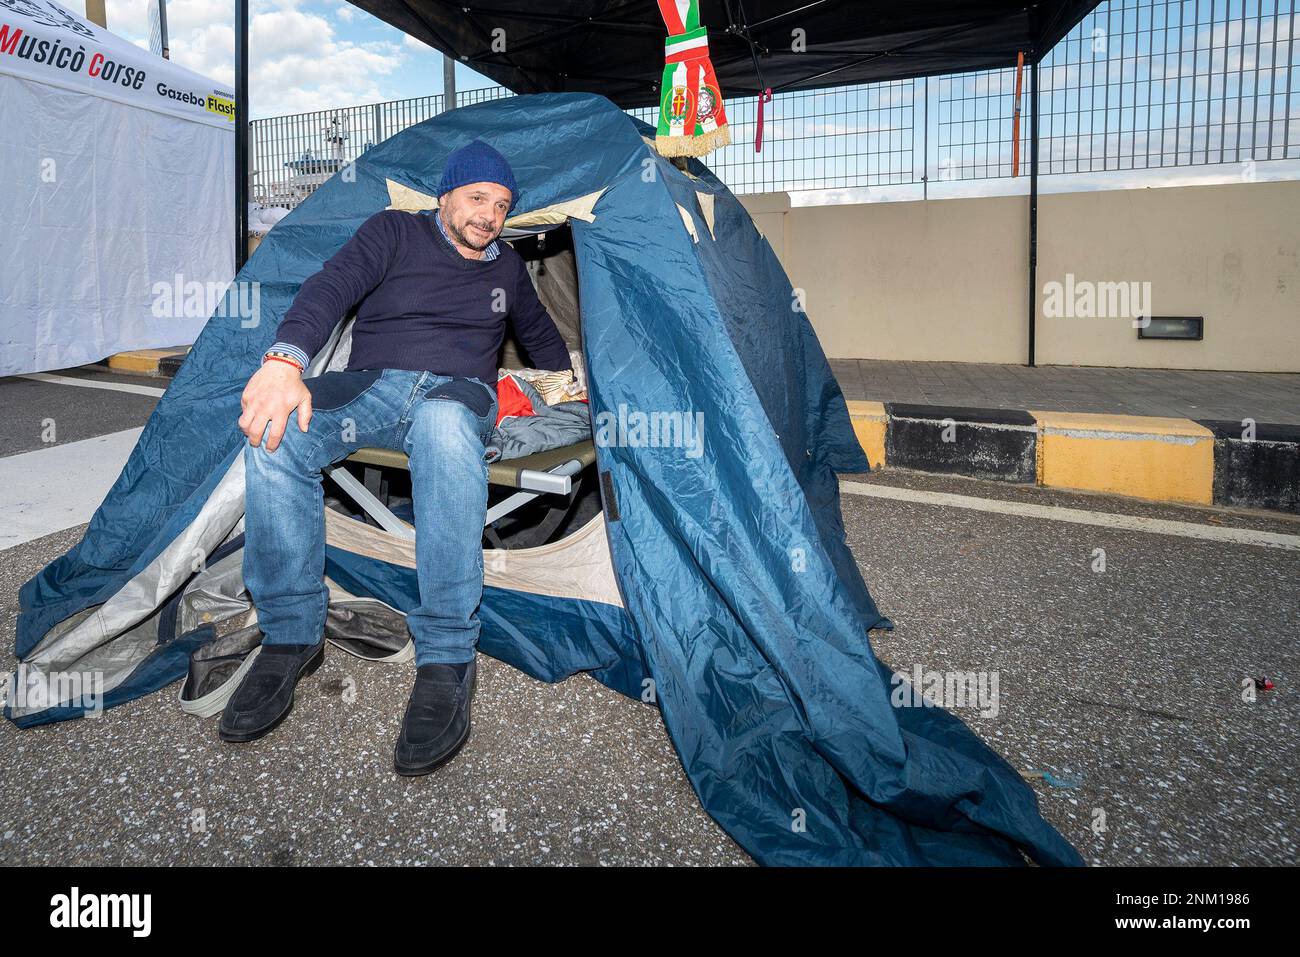 Onzin Perth Blackborough Verwoesting The mayor of Messina, Cateno De Luca, sits by e tent as he stages a protest  at the Messina harbor, Italy, Tuesday, Jan. 18, 2022. The mayor of the  Sicilian city of